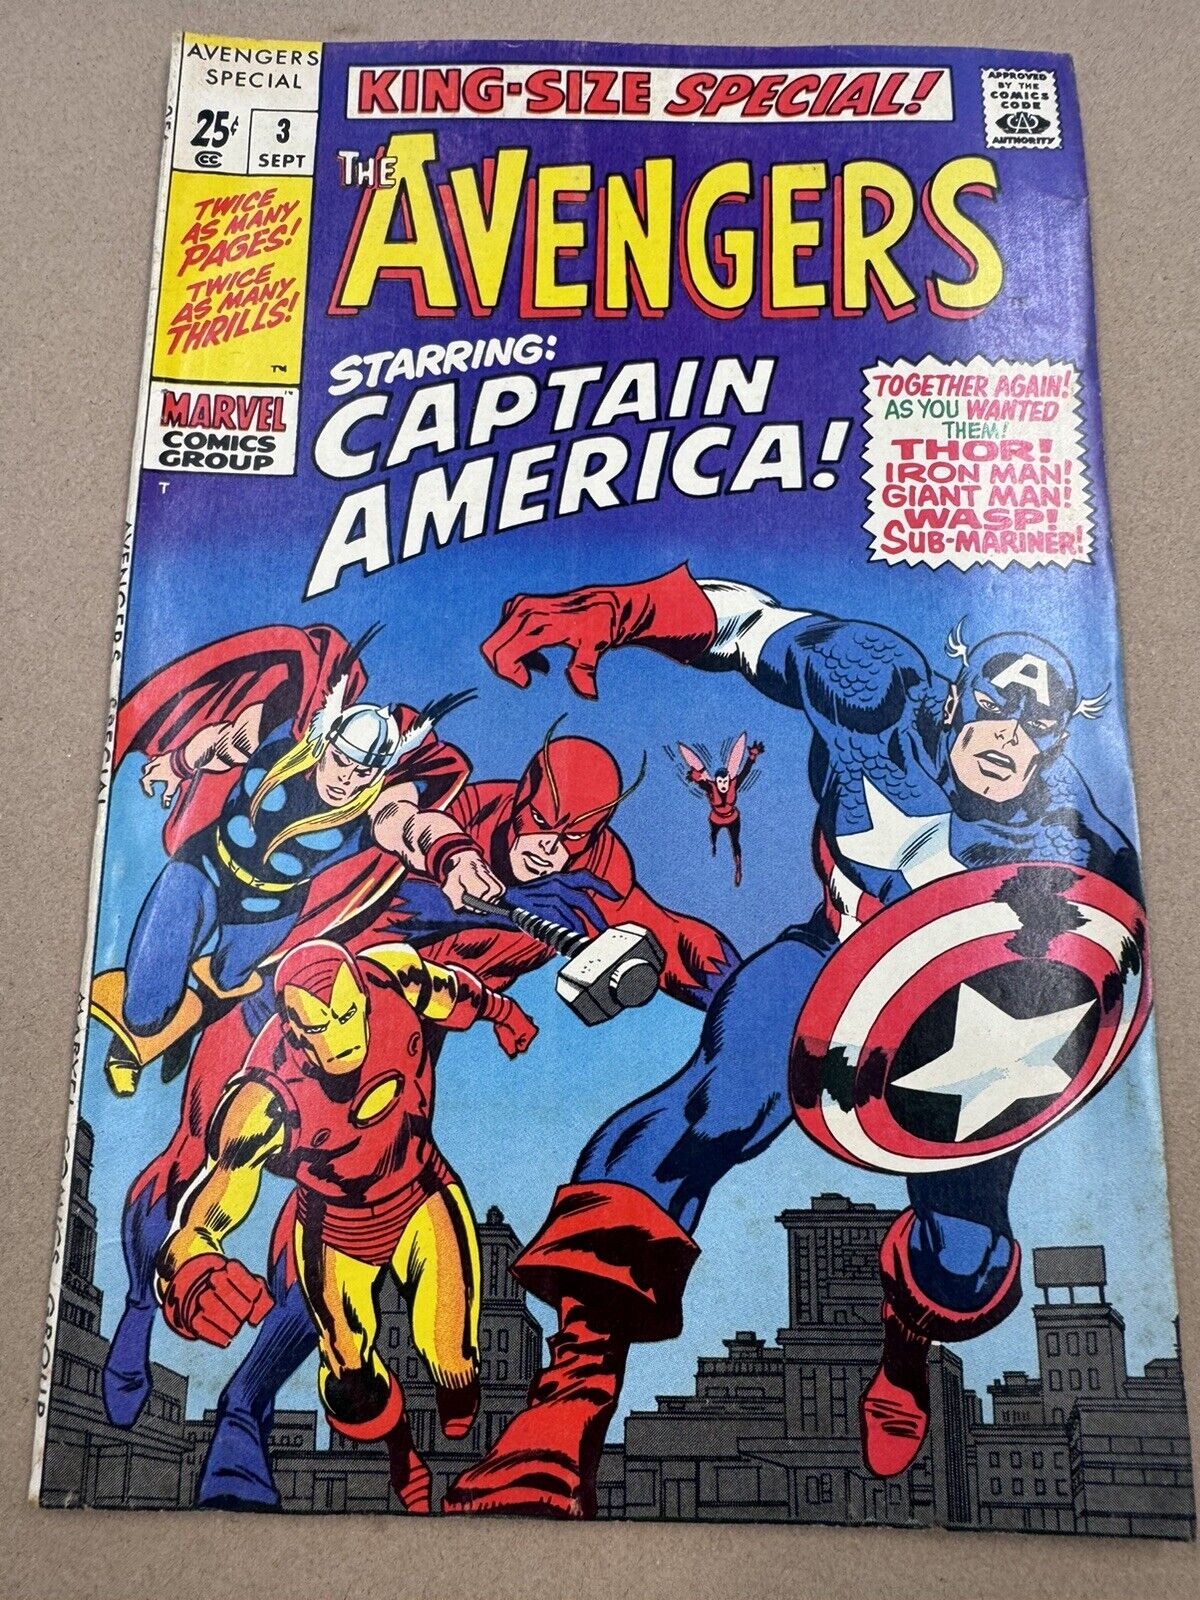 THE AVENGERS KING SIZE SPECIAL (ANNUAL) #3 Captain America 1969